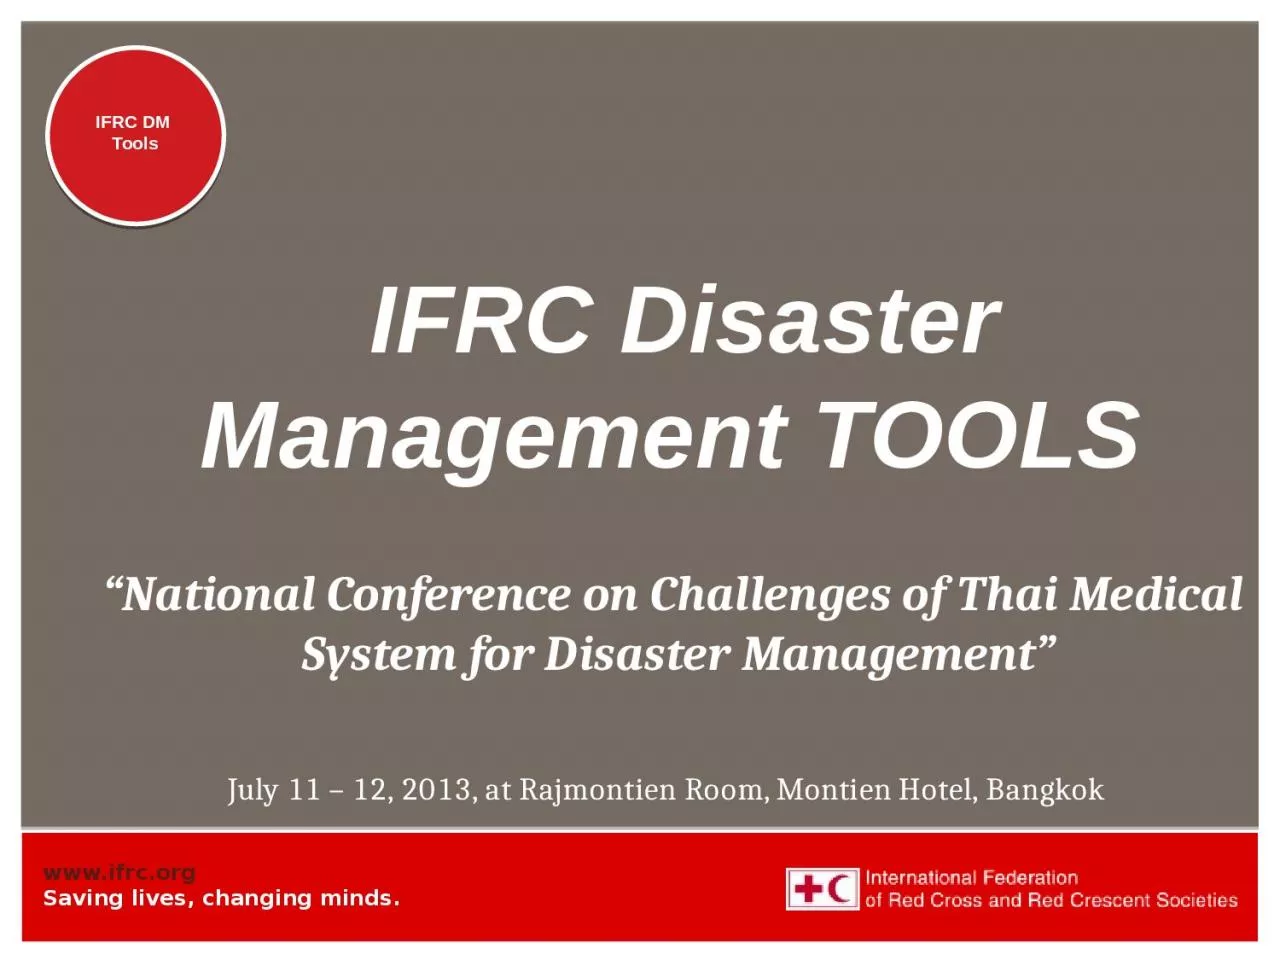 IFRC Disaster Management TOOLS